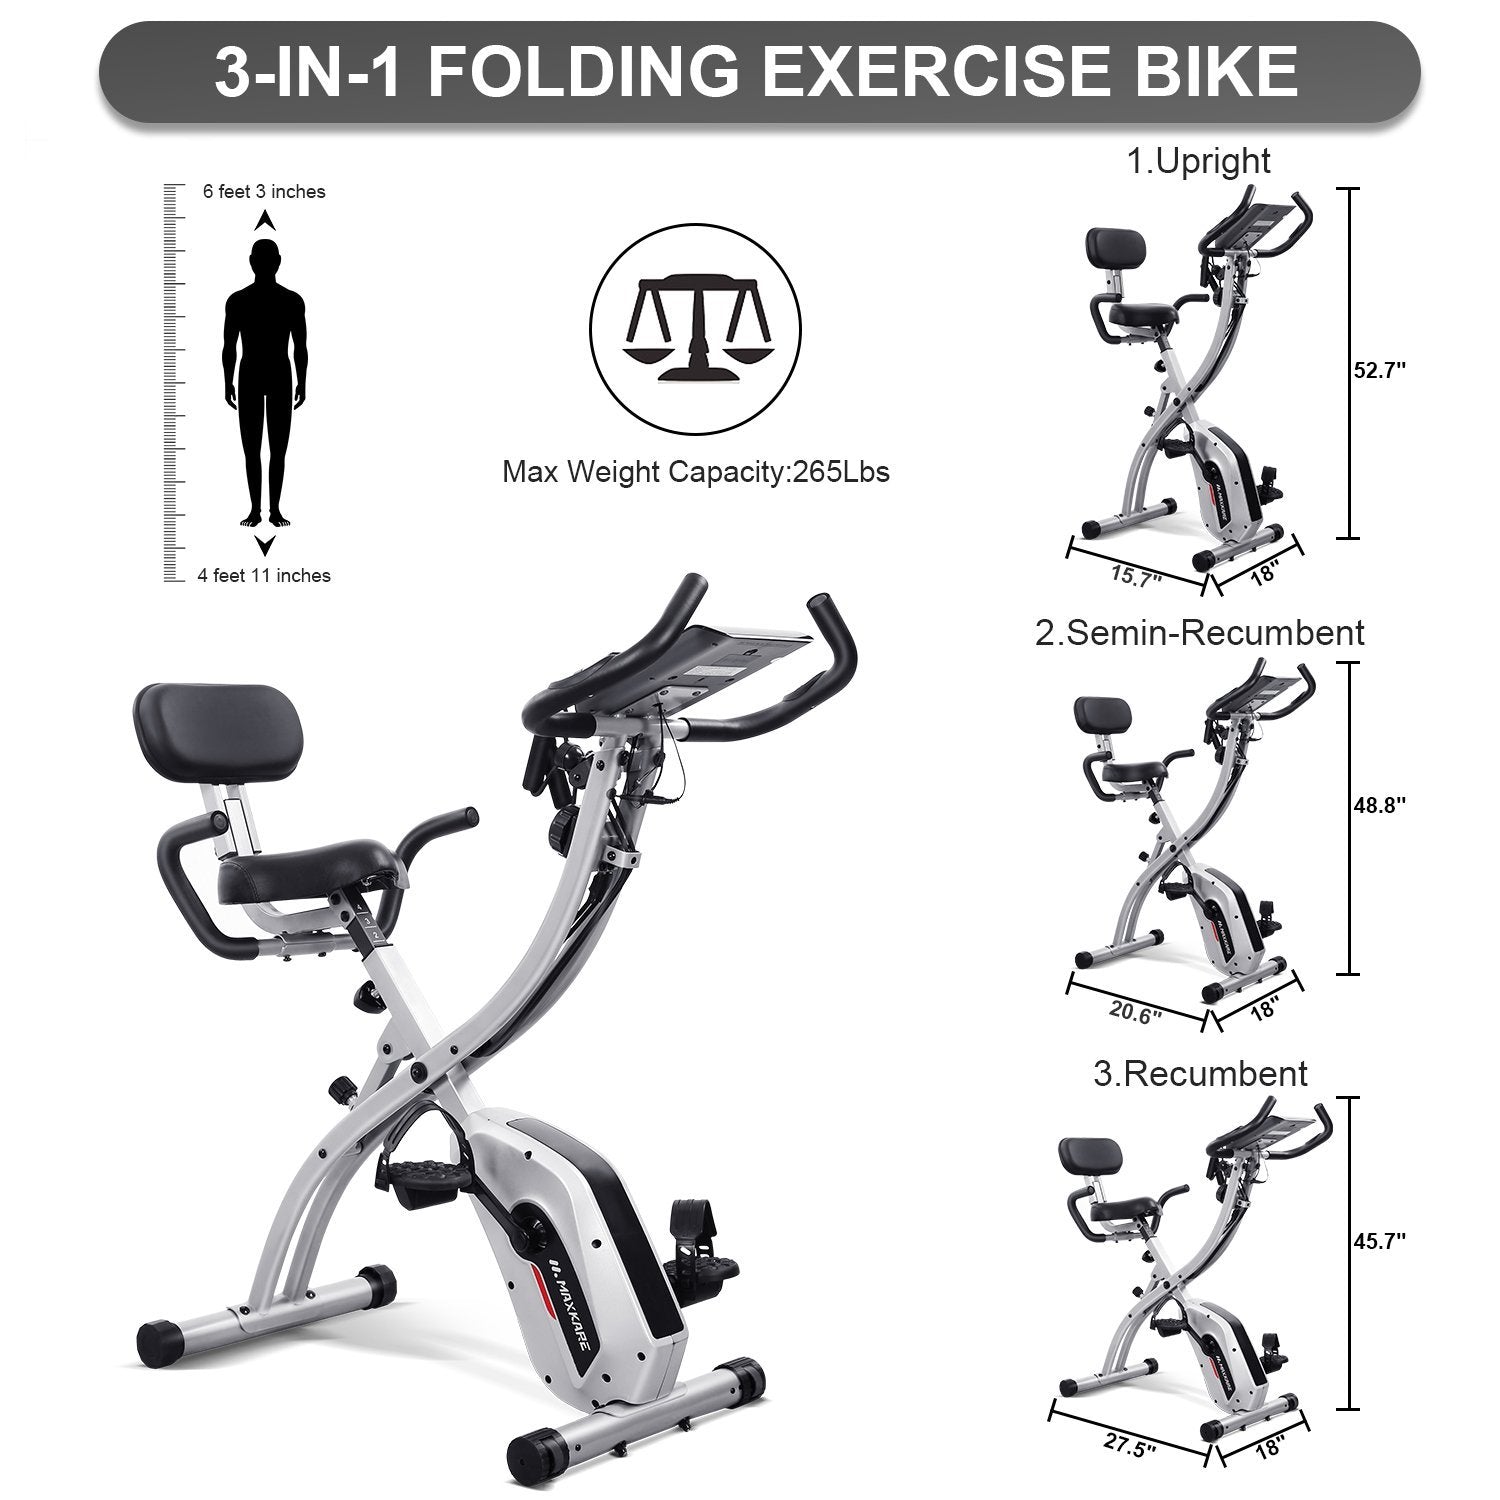 Load image into Gallery viewer, Maxkare Upright Folding Exercise Bike Stationary Recumbent Magnetic Indoor Cycling Bike with Arm Resistance Bands/Adjustable Resistance/LCD Monitor for Home Use - NAIPO
